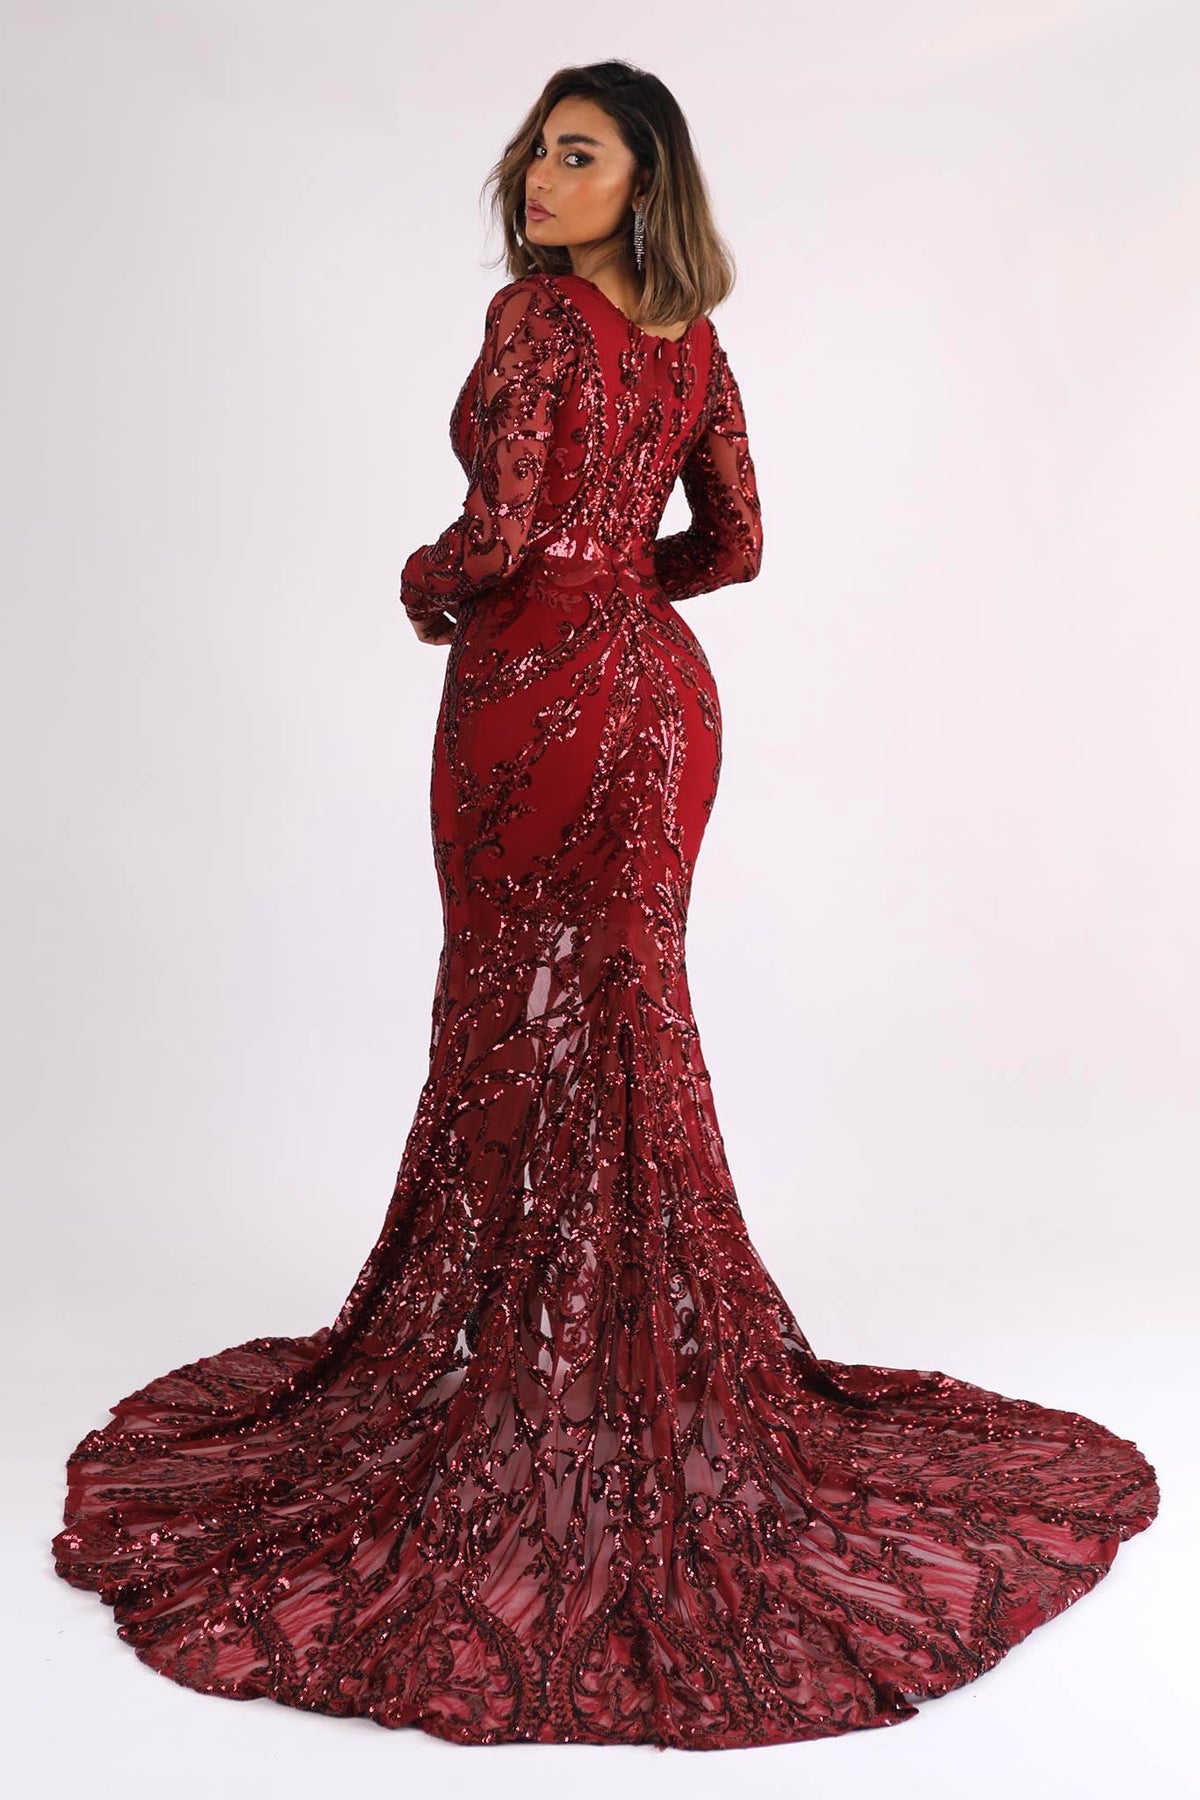 Close Back and Sweep Train of Deep Red Pattern Sequin Long Sleeve Floor Length Evening Gown with V Plunging Neckline and High Front Slit